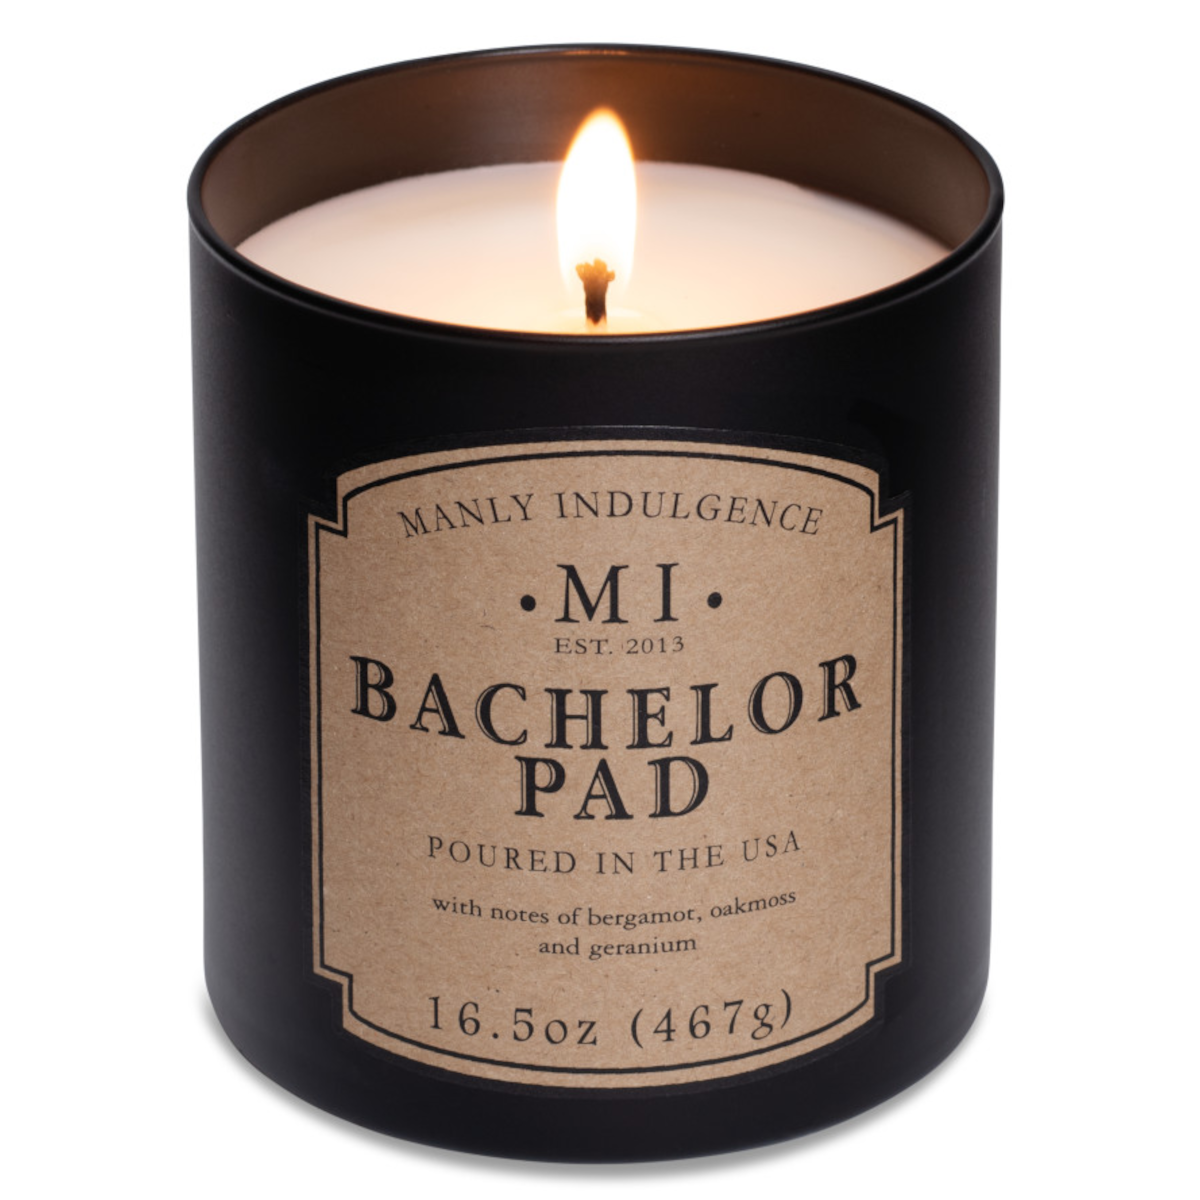 Colonial Candle - Manly Indulgence - Classic - Bachelor Pad - geurkaars voor mannen - 467 gram Colonial Candle